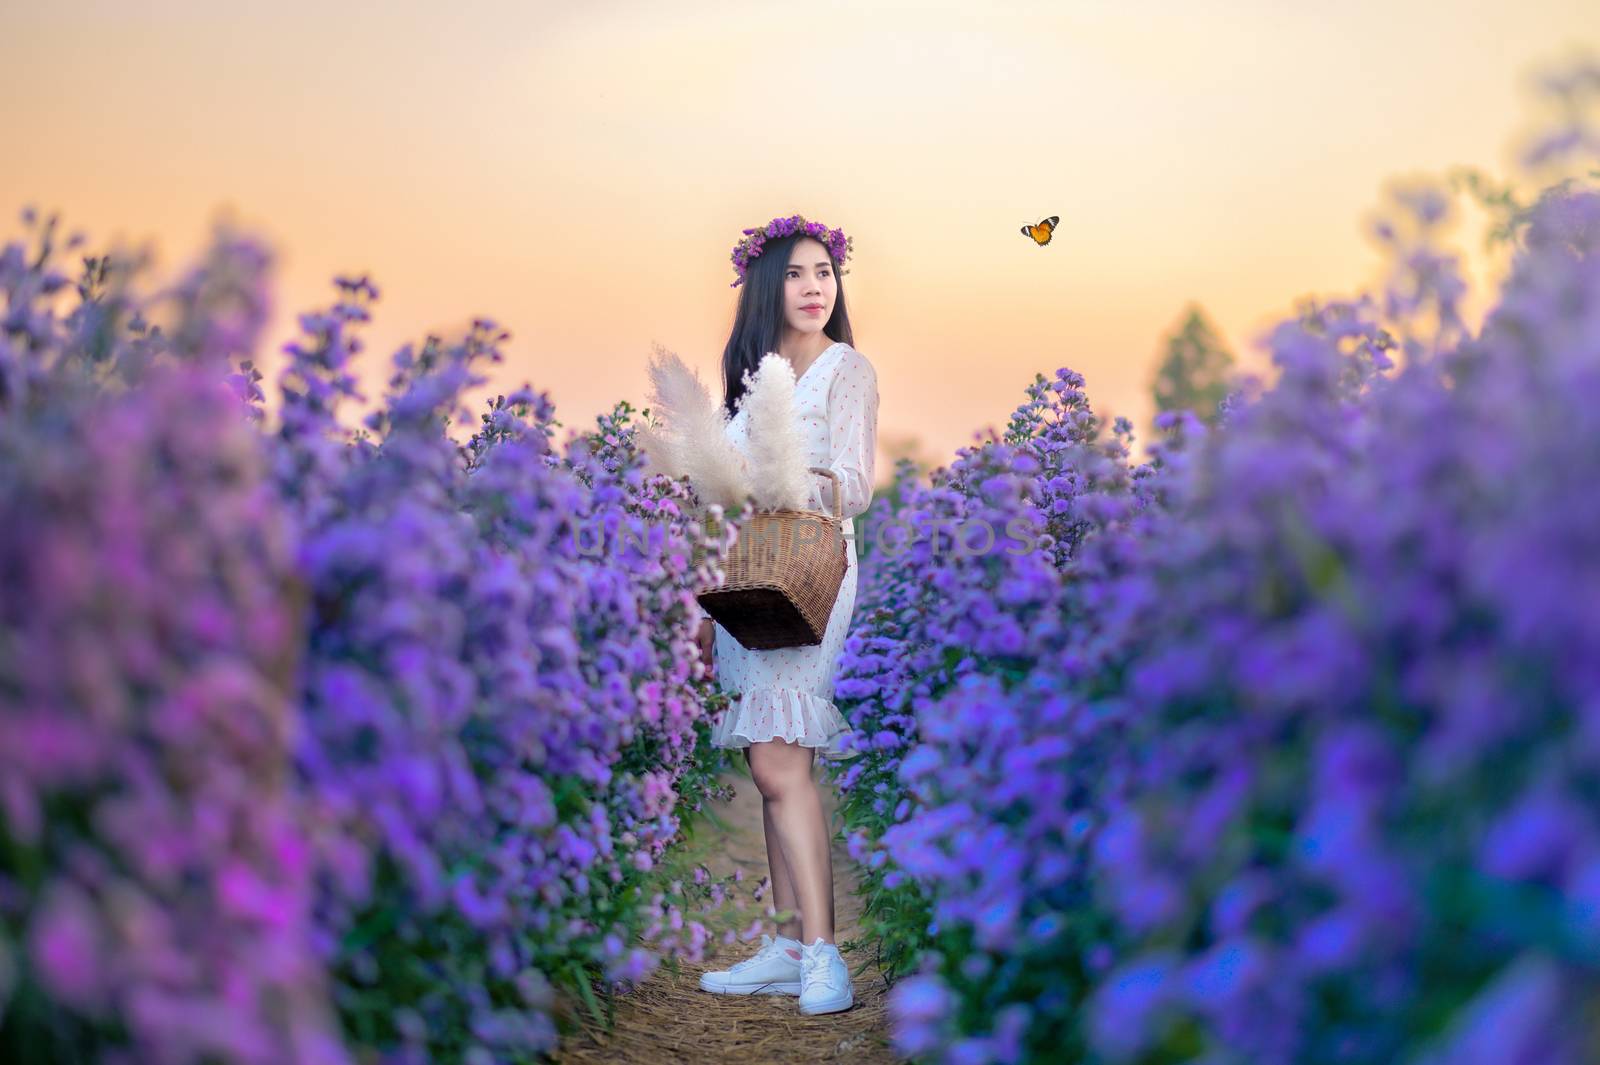 A woman watching flowers in a flower field with butterflies in the evening, orange light.